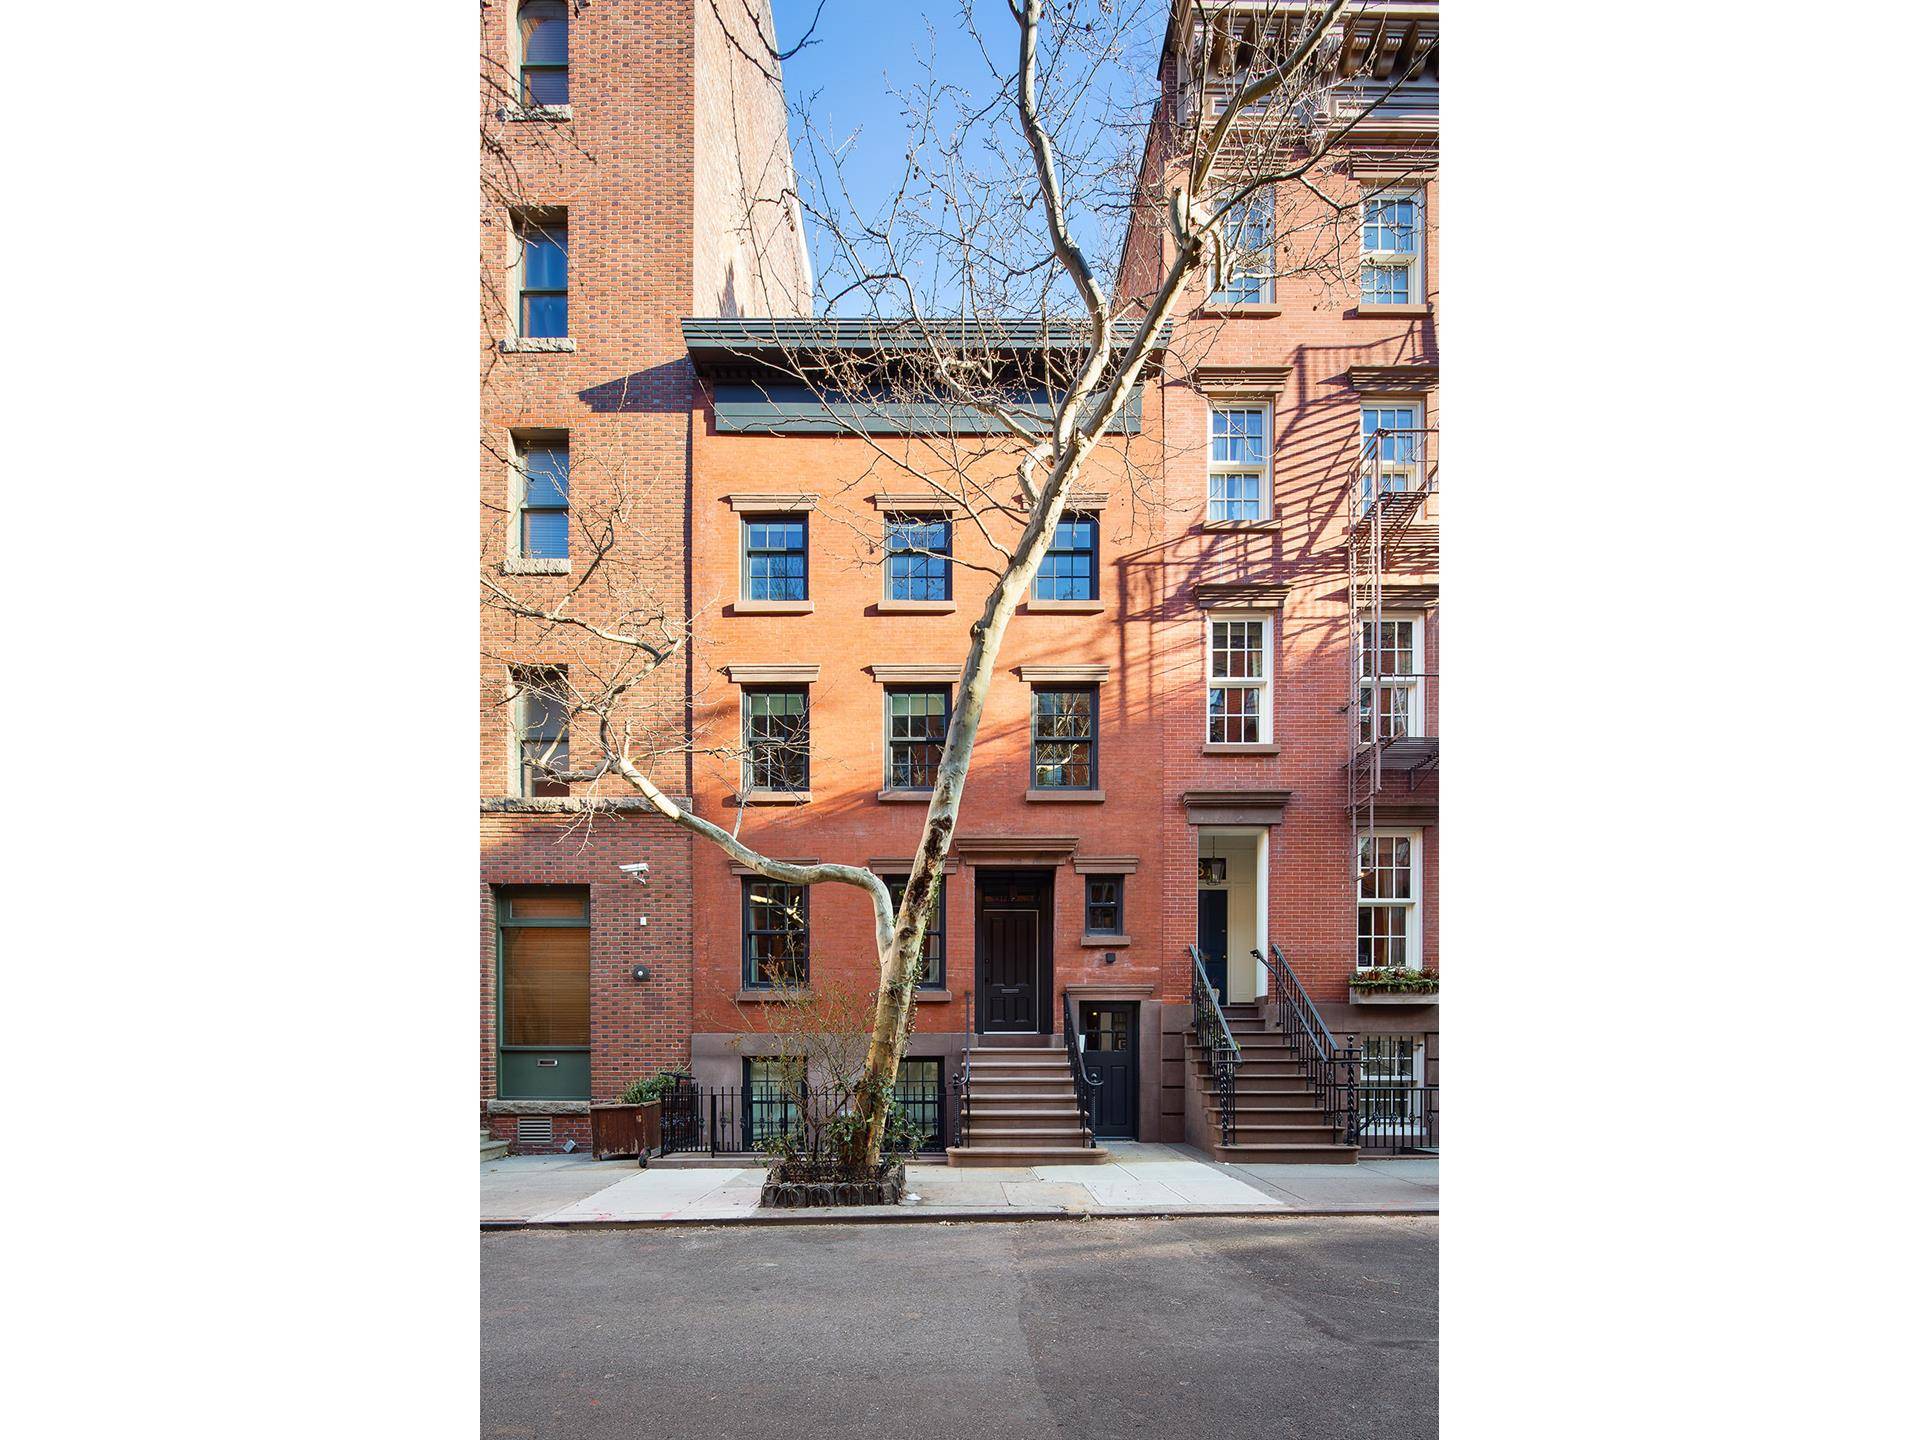 Built over 170 years ago in 1852, this historic townhouse at 83 Horatio Street represents an incredible opportunity to own a meticulously renovated, 23' wide, never been lived in house, ...